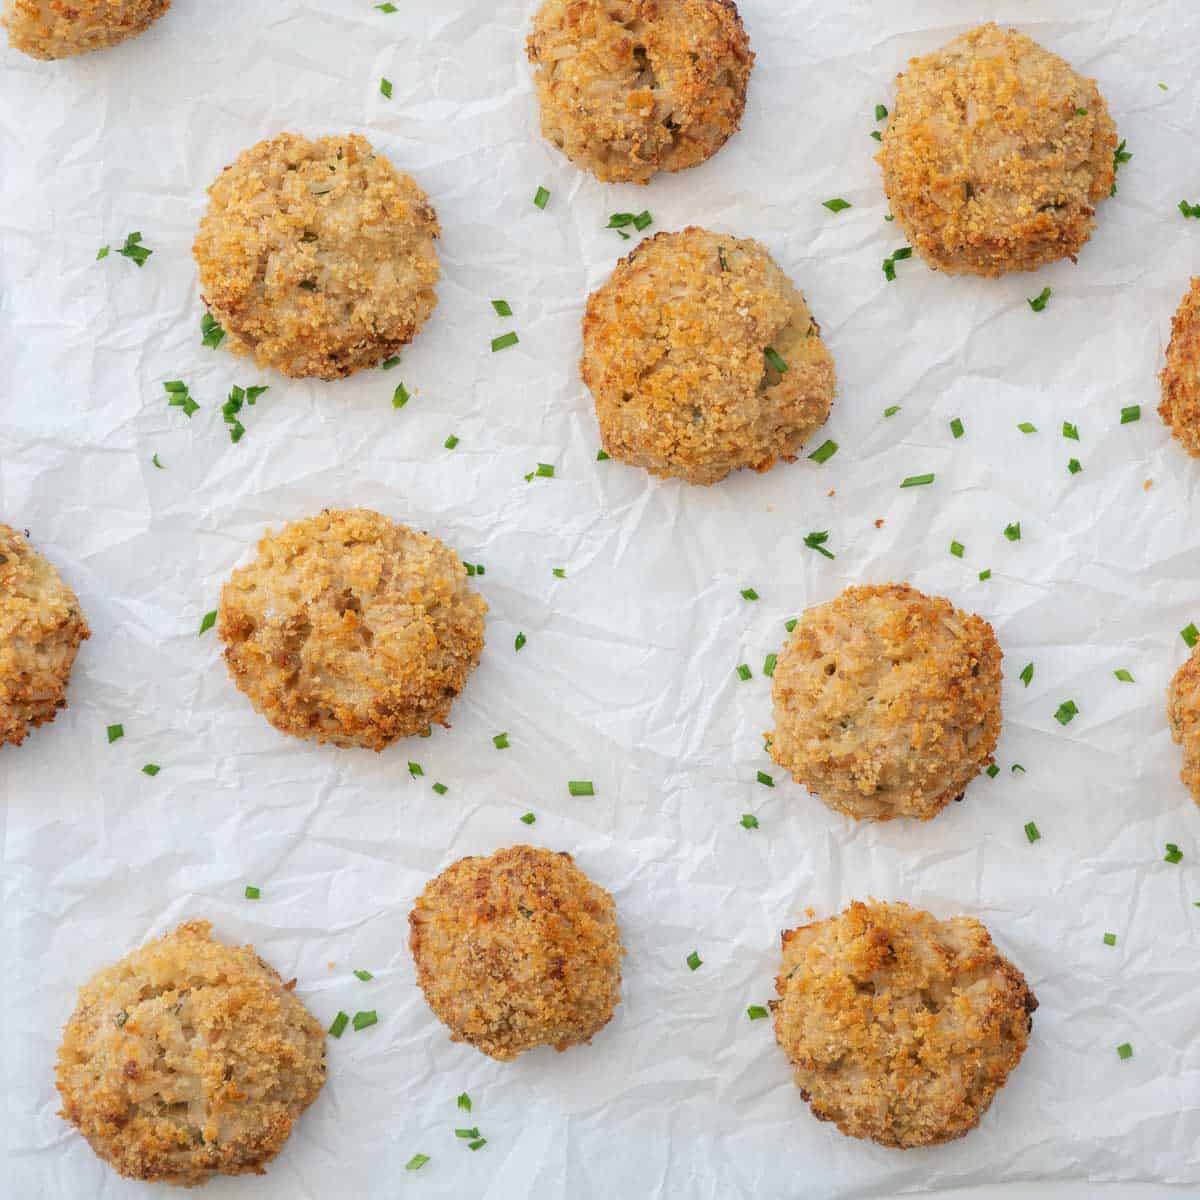 Goldem brown tuna rice balls on crinkled parchment paper scattered with chopped chives.